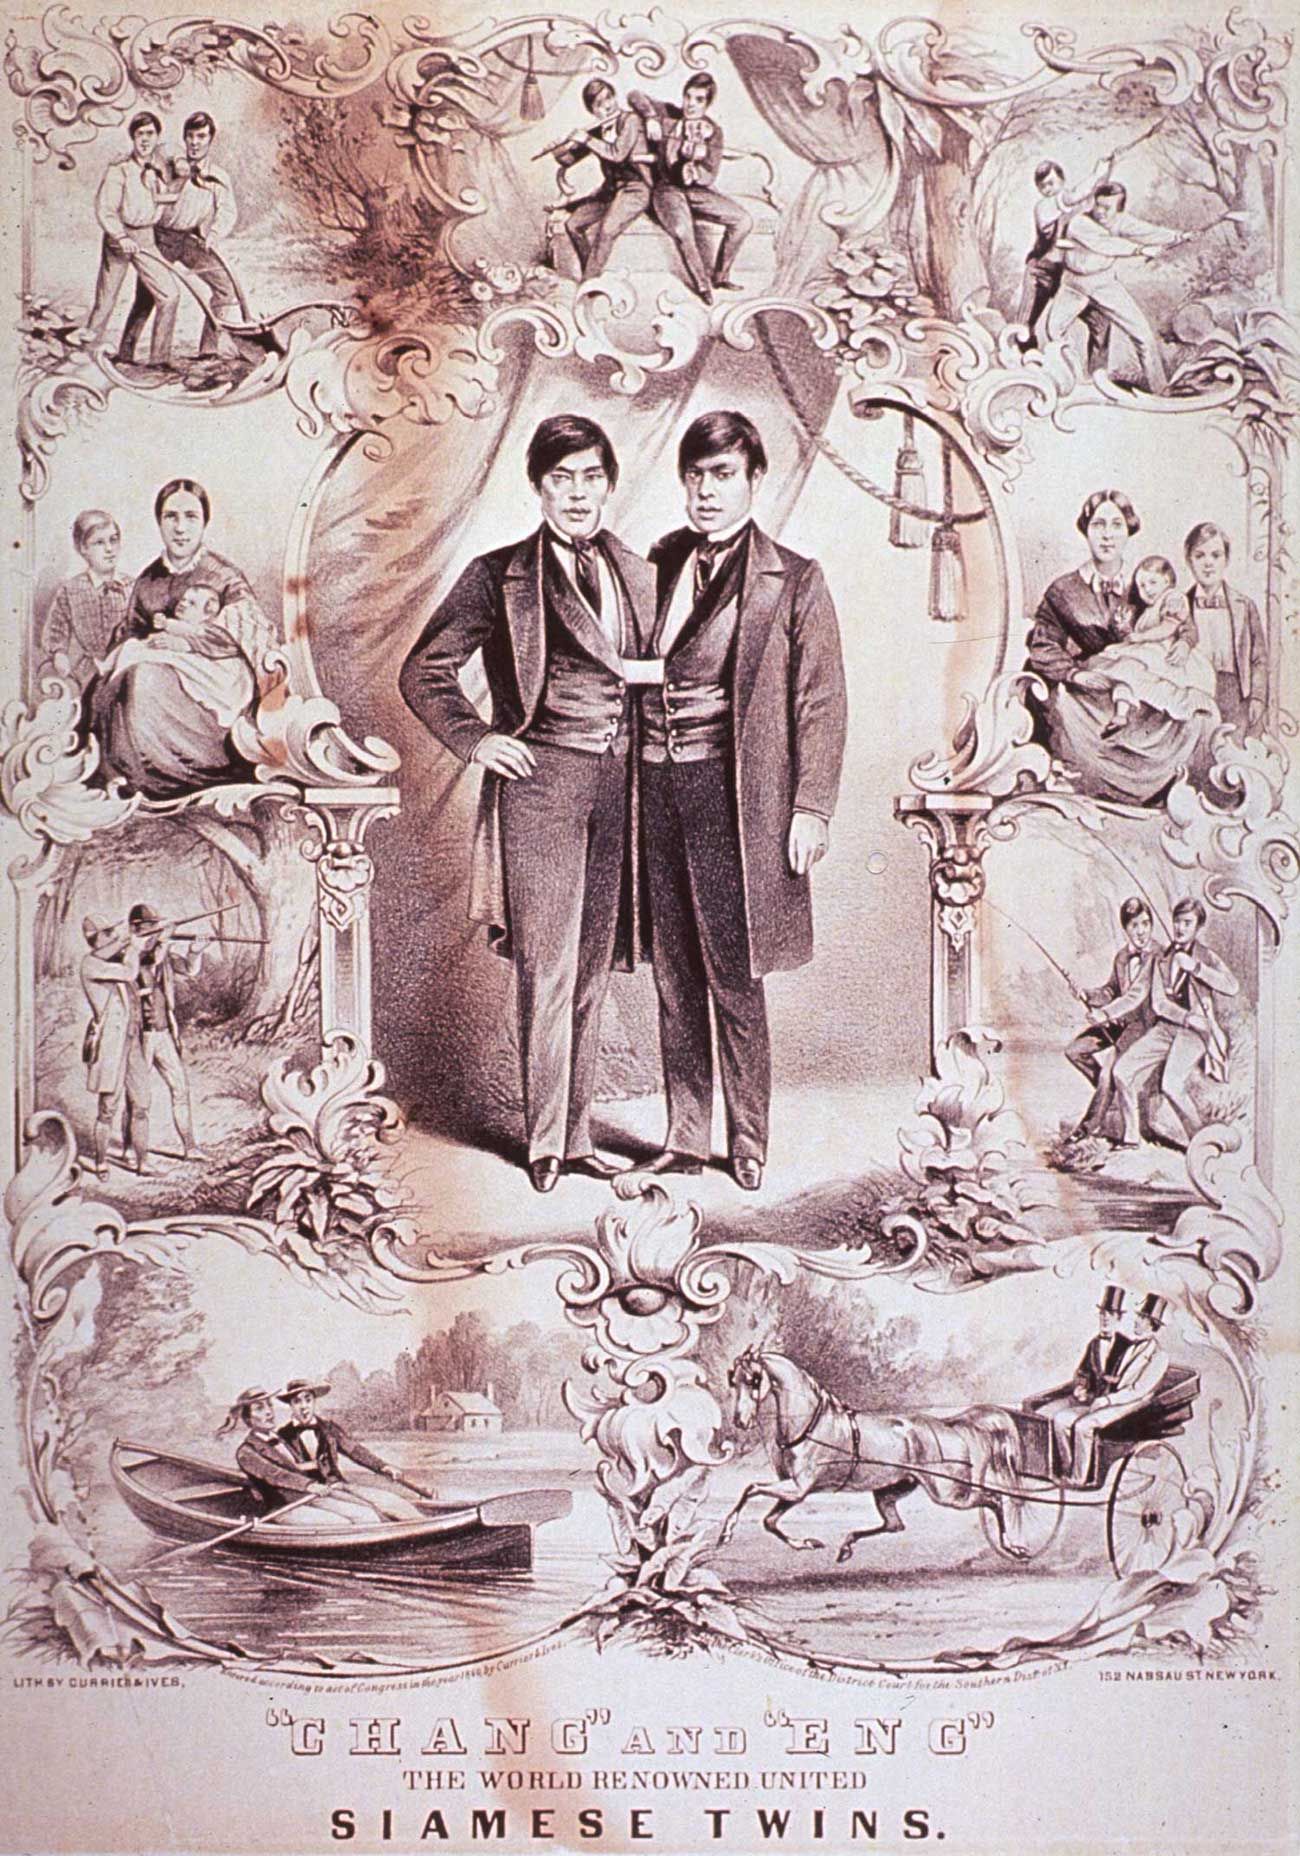 Faded lithograph depicting conjoined twins Chang and Eng